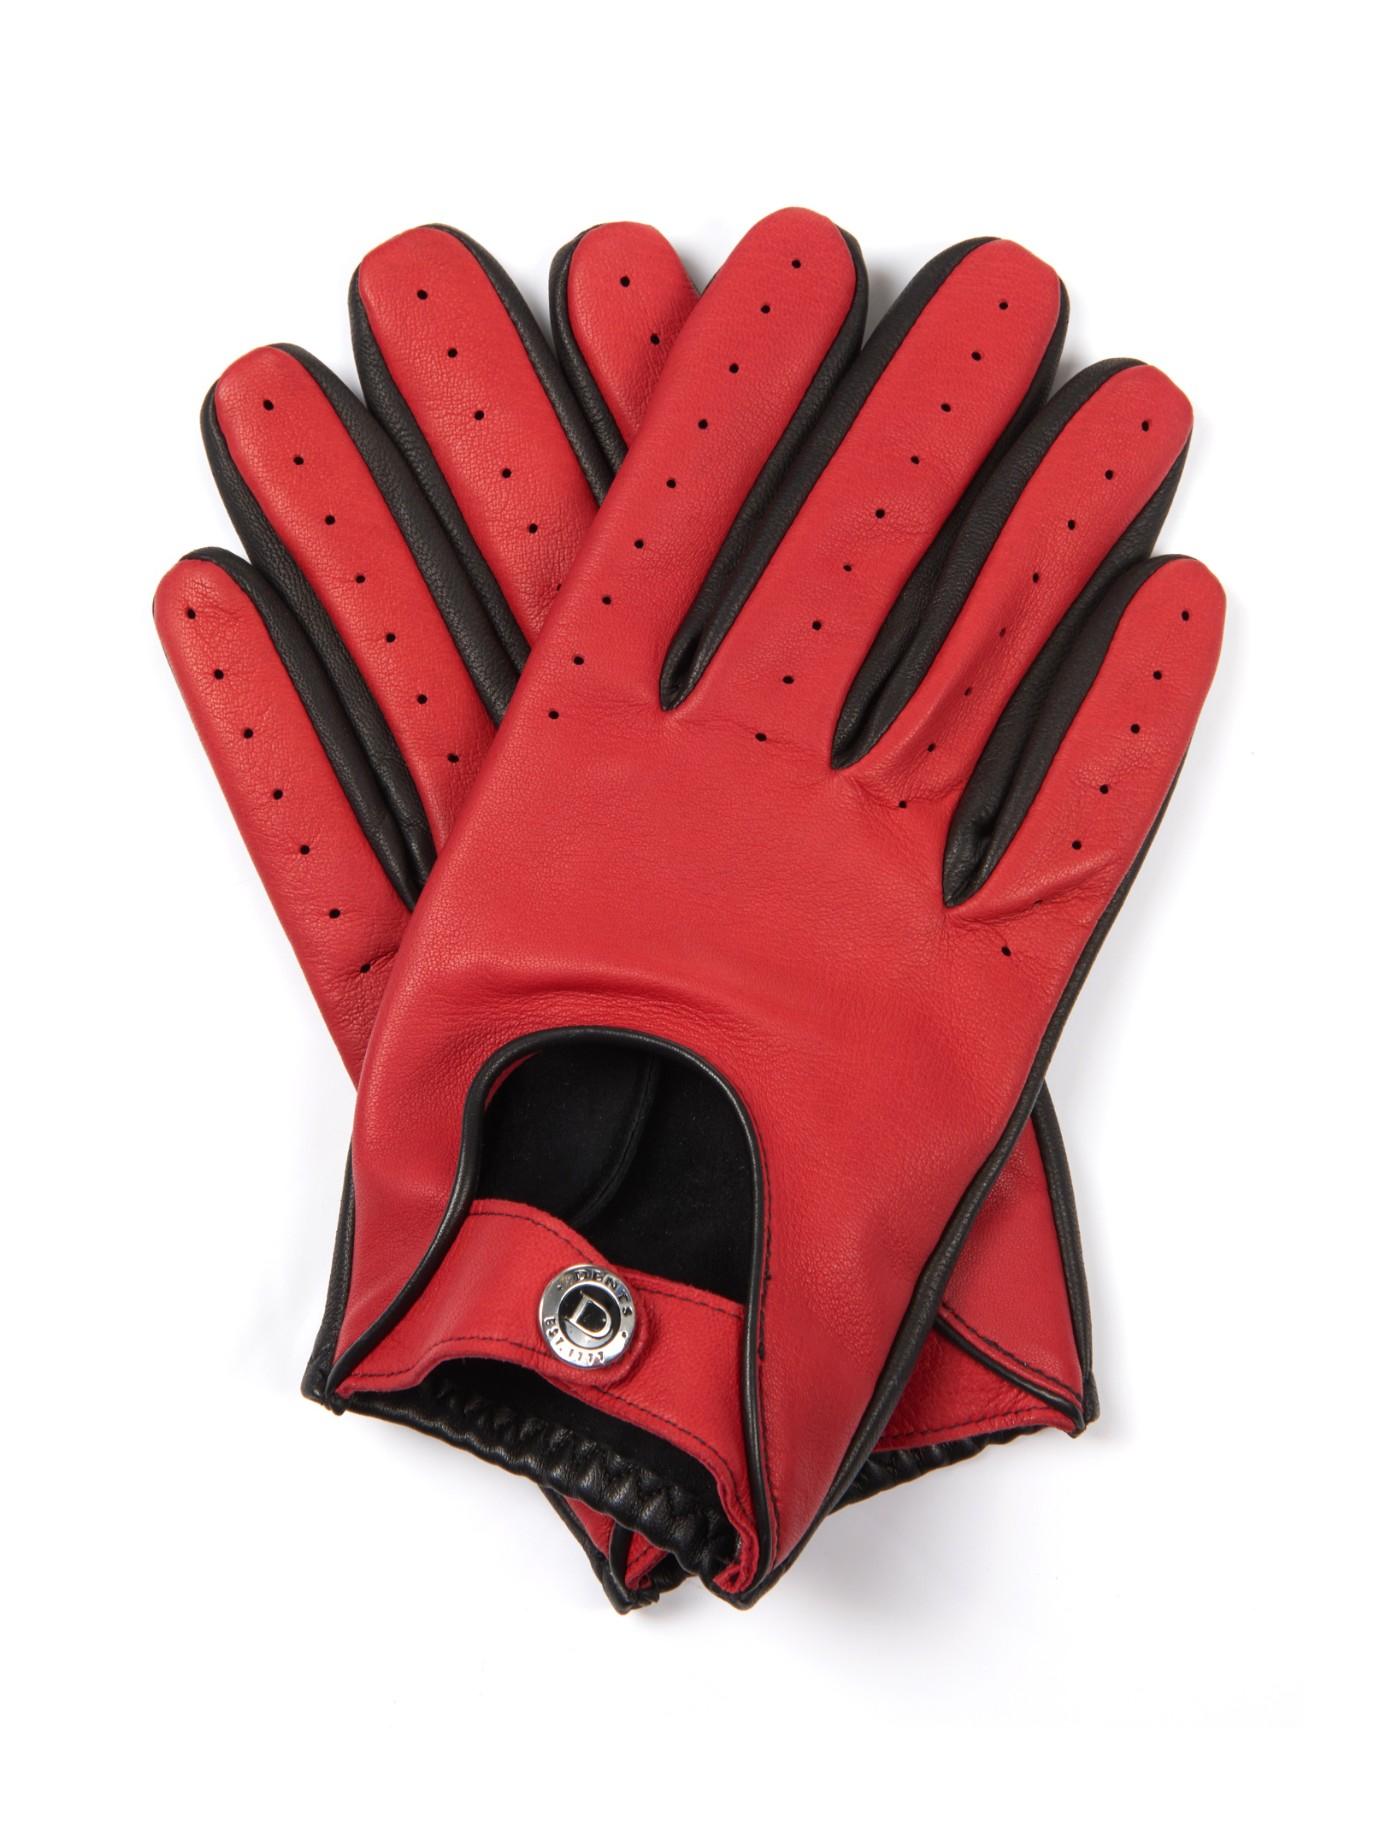 Lyst - Dents Woburn Leather Driving Gloves in Red for Men